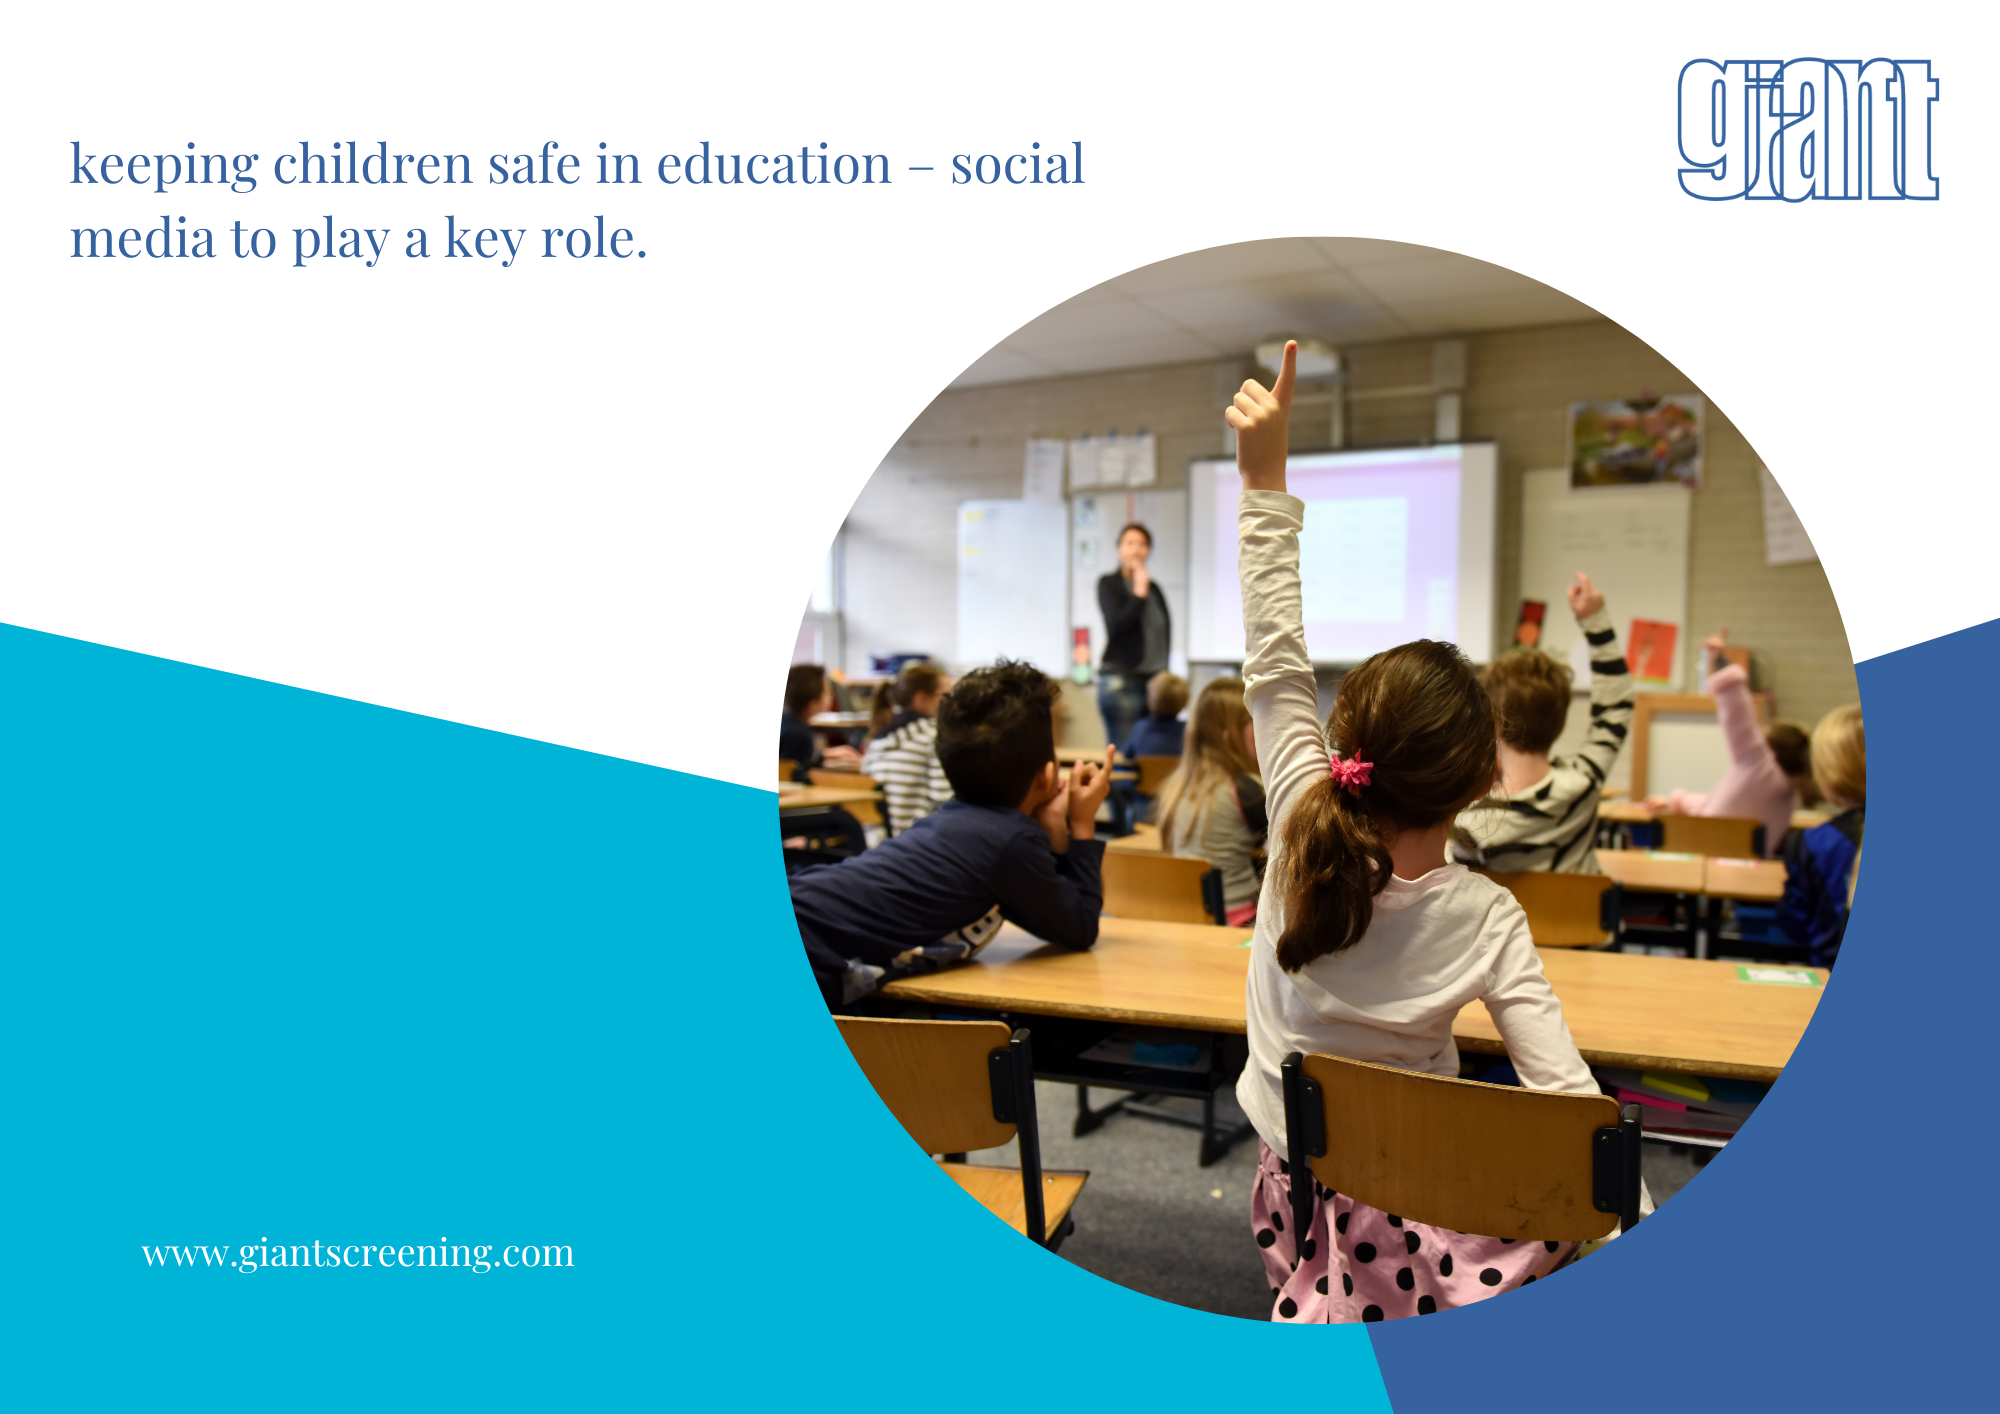 Keeping children safe in education – social media to play a key role.